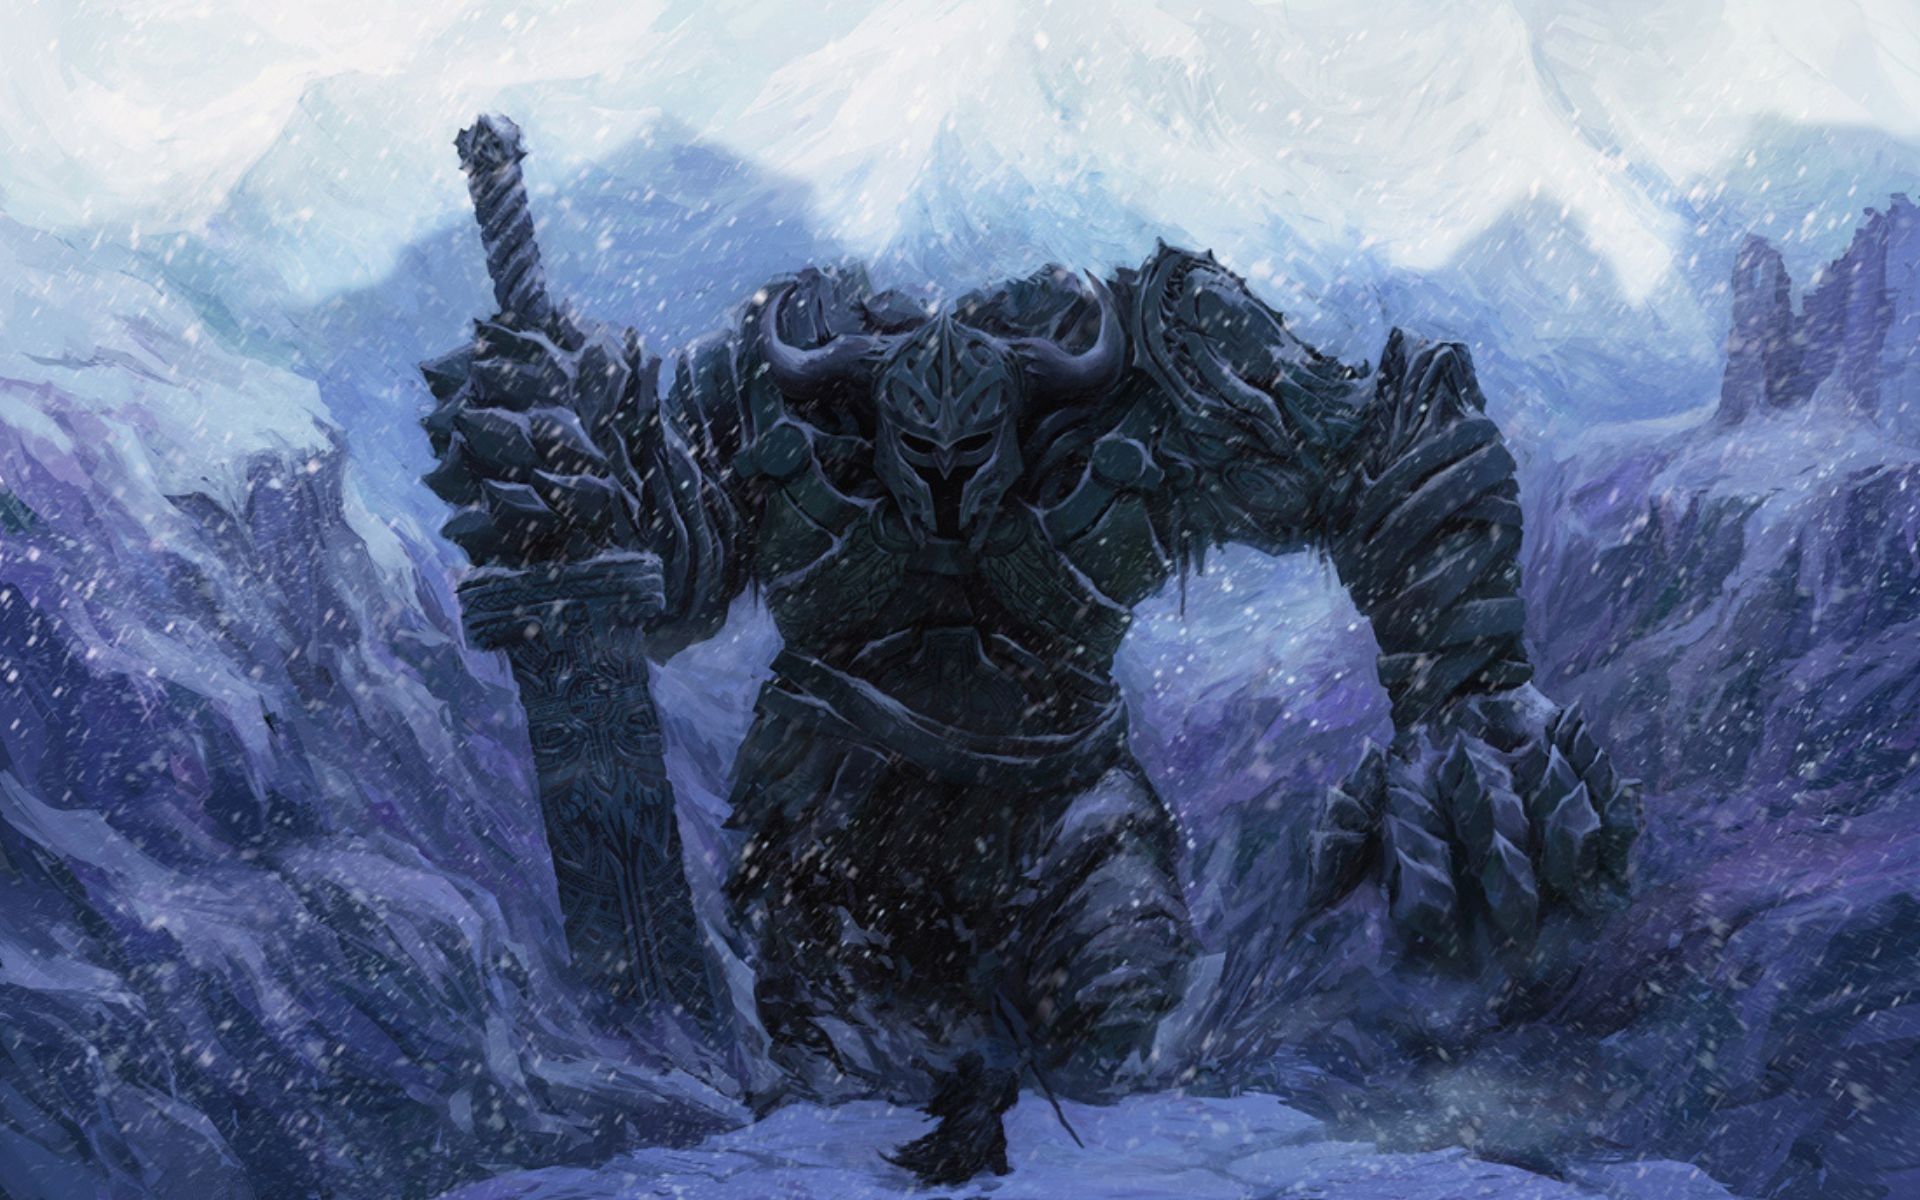 Image of a giant.